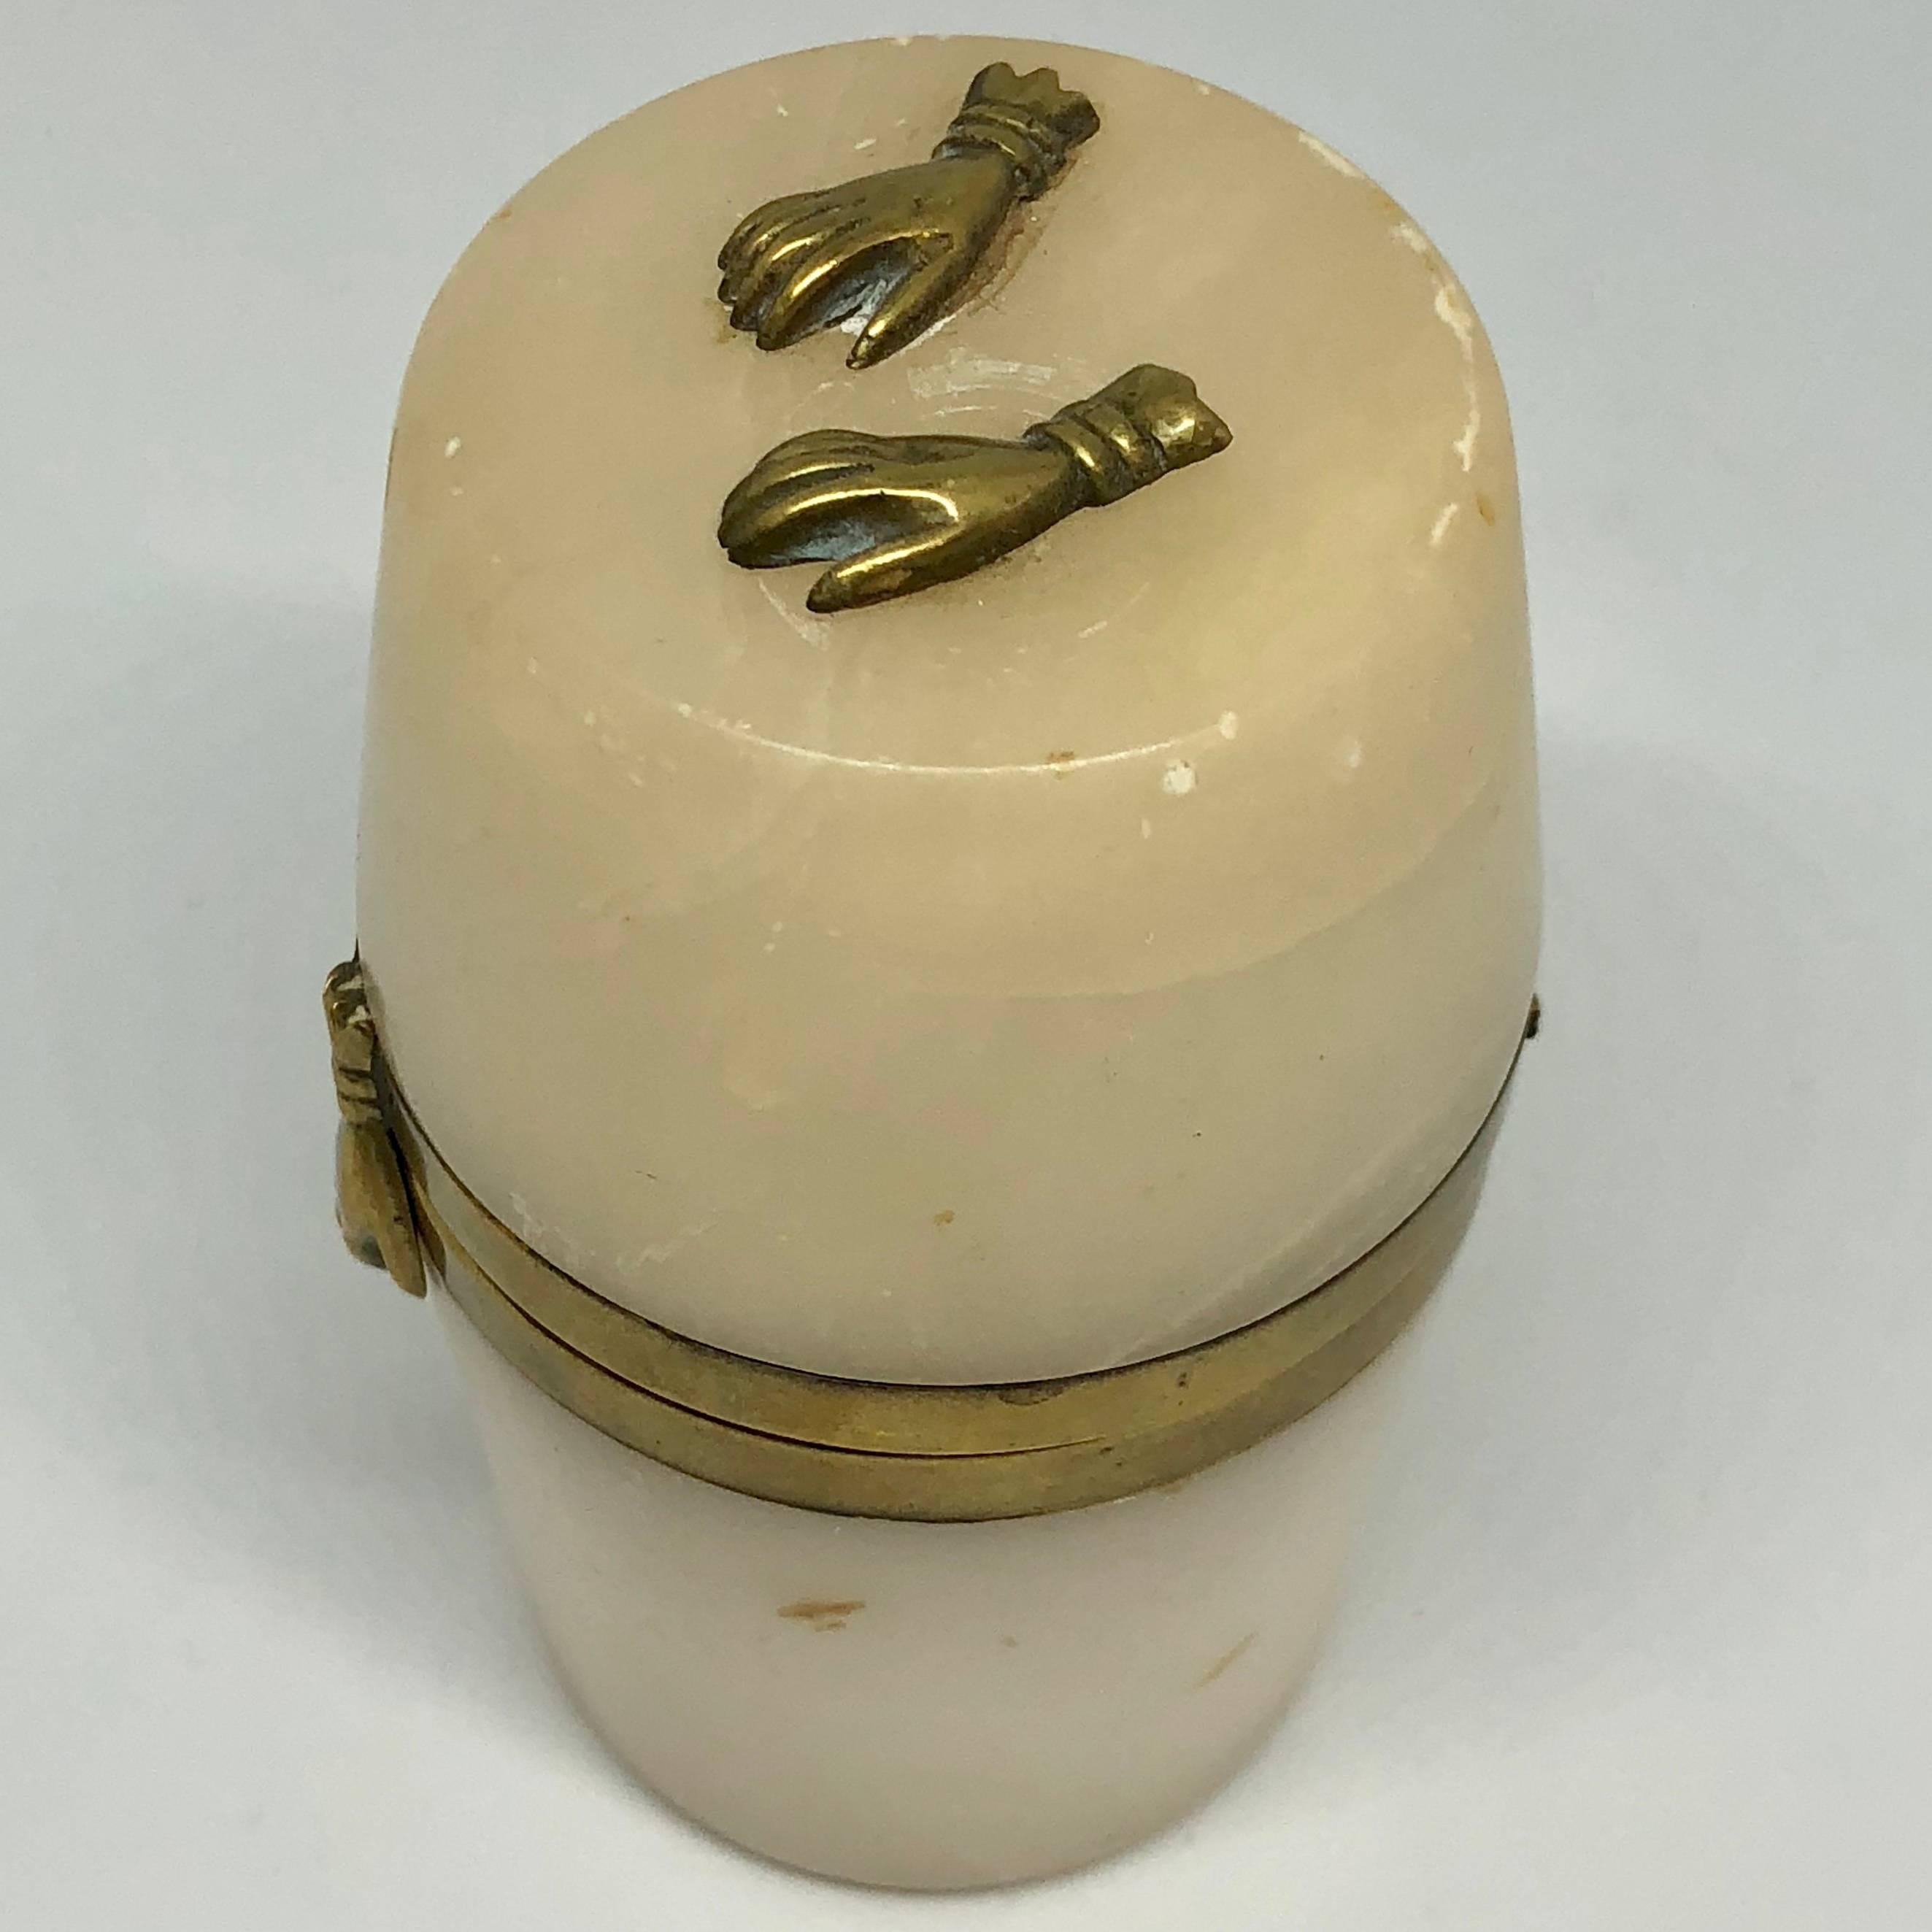 Small 18th Century Alabaster Barrel Shaped Jewelry Box W/ Brass Hands Decor For Sale 10